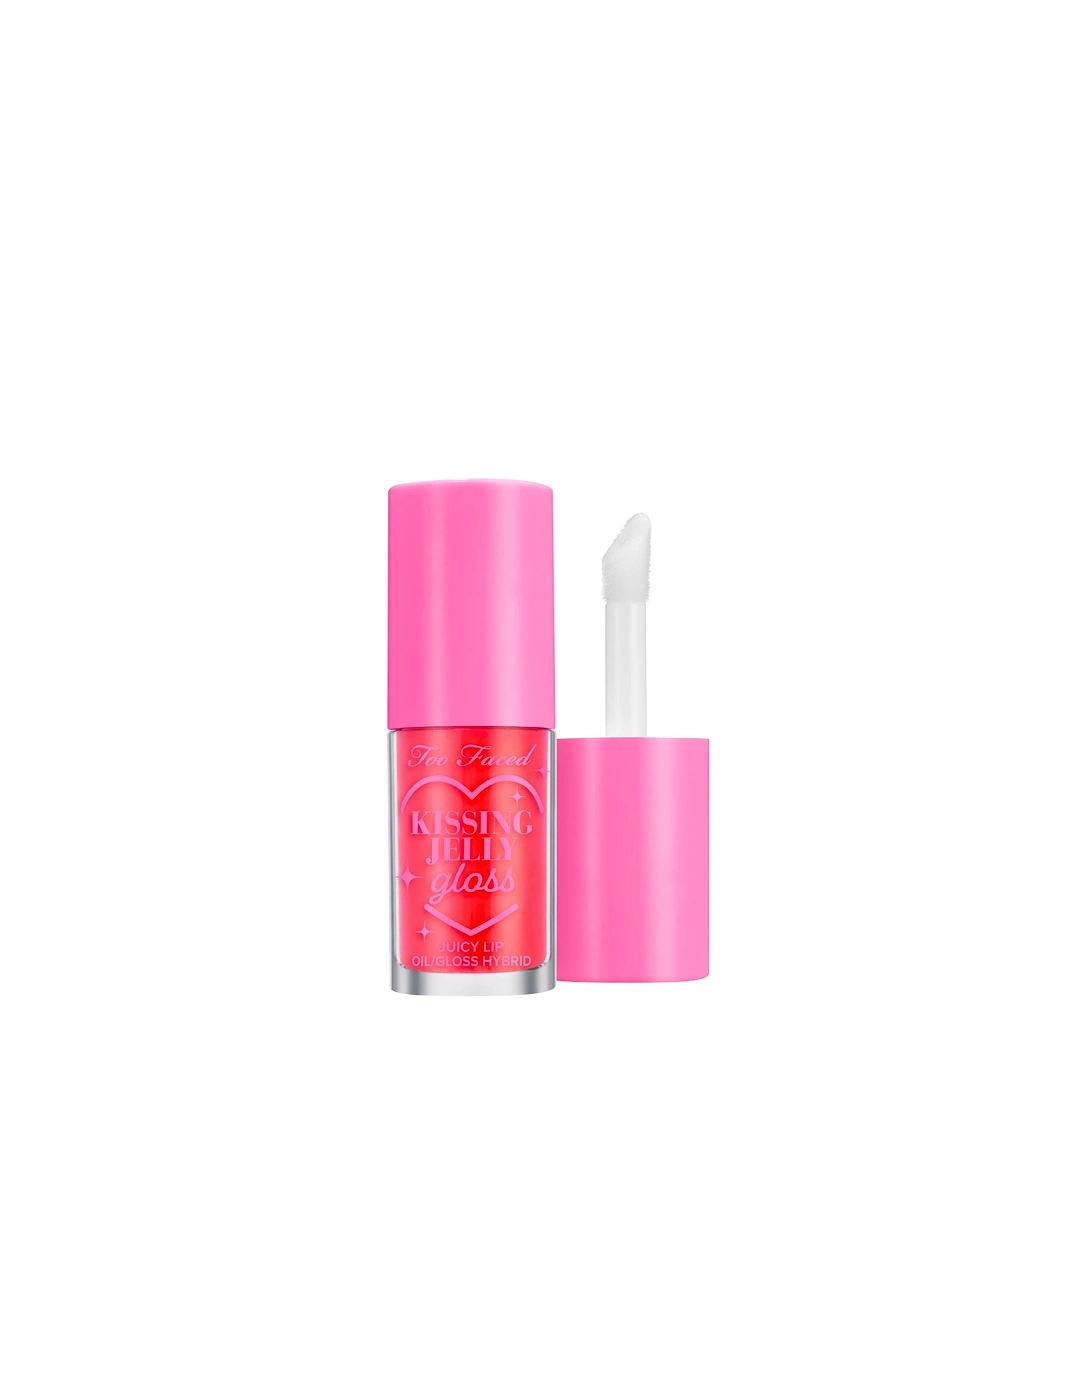 Kissing Jelly Lip Oil Gloss - Sour Watermelon, 2 of 1